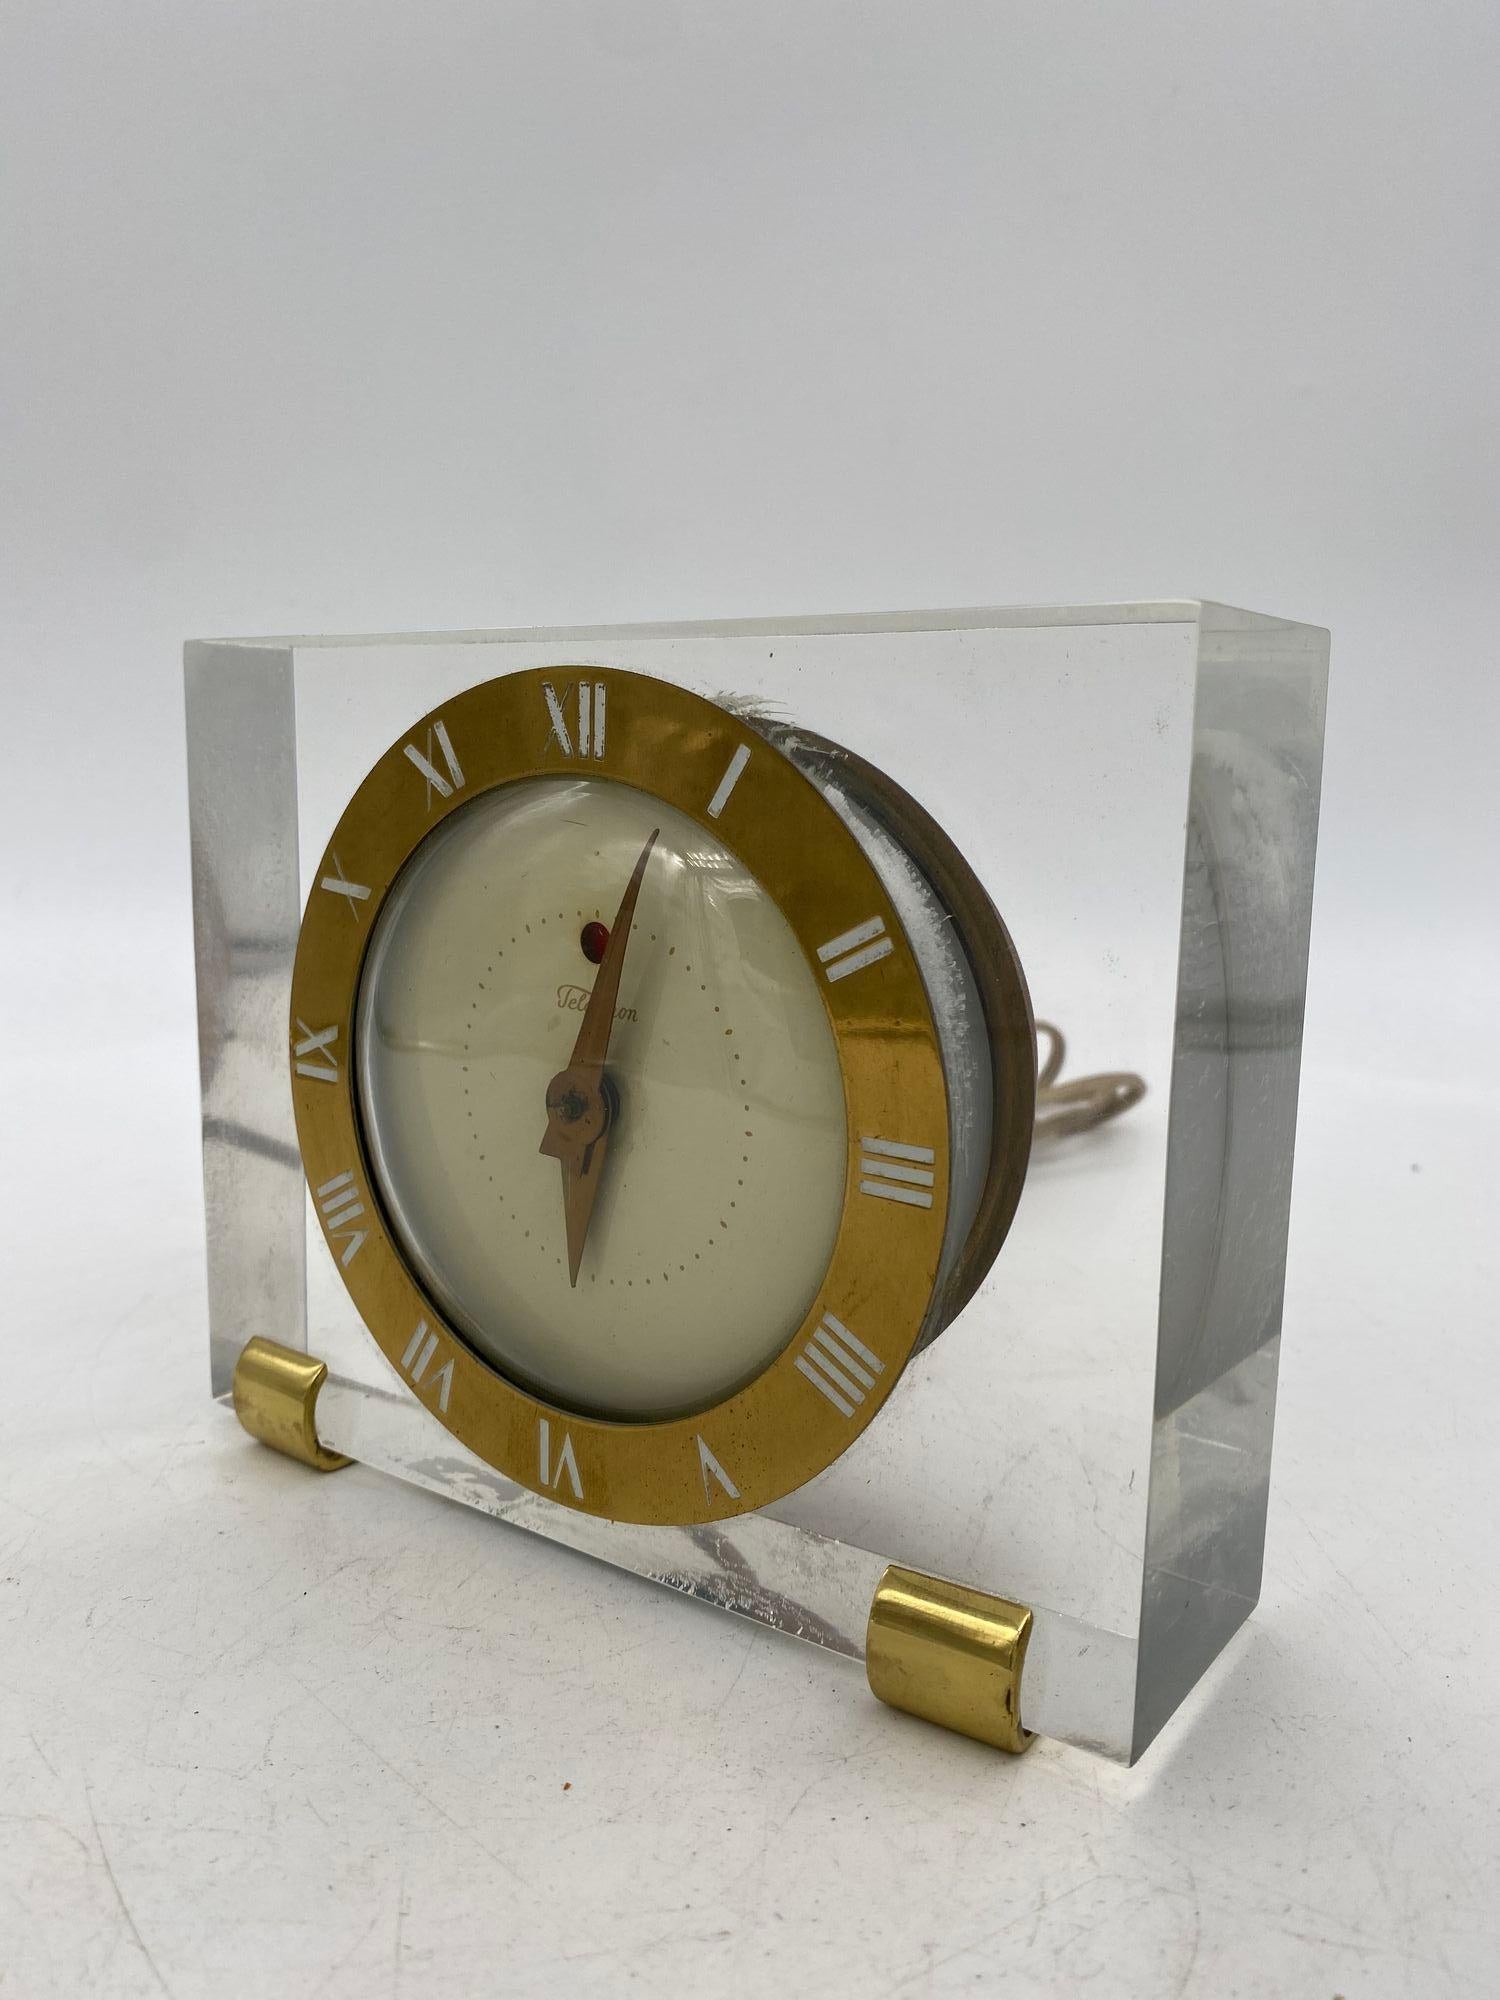 Telechron Model 7H141 Lucite & Brass Electric Desk Clock In Excellent Condition For Sale In Van Nuys, CA